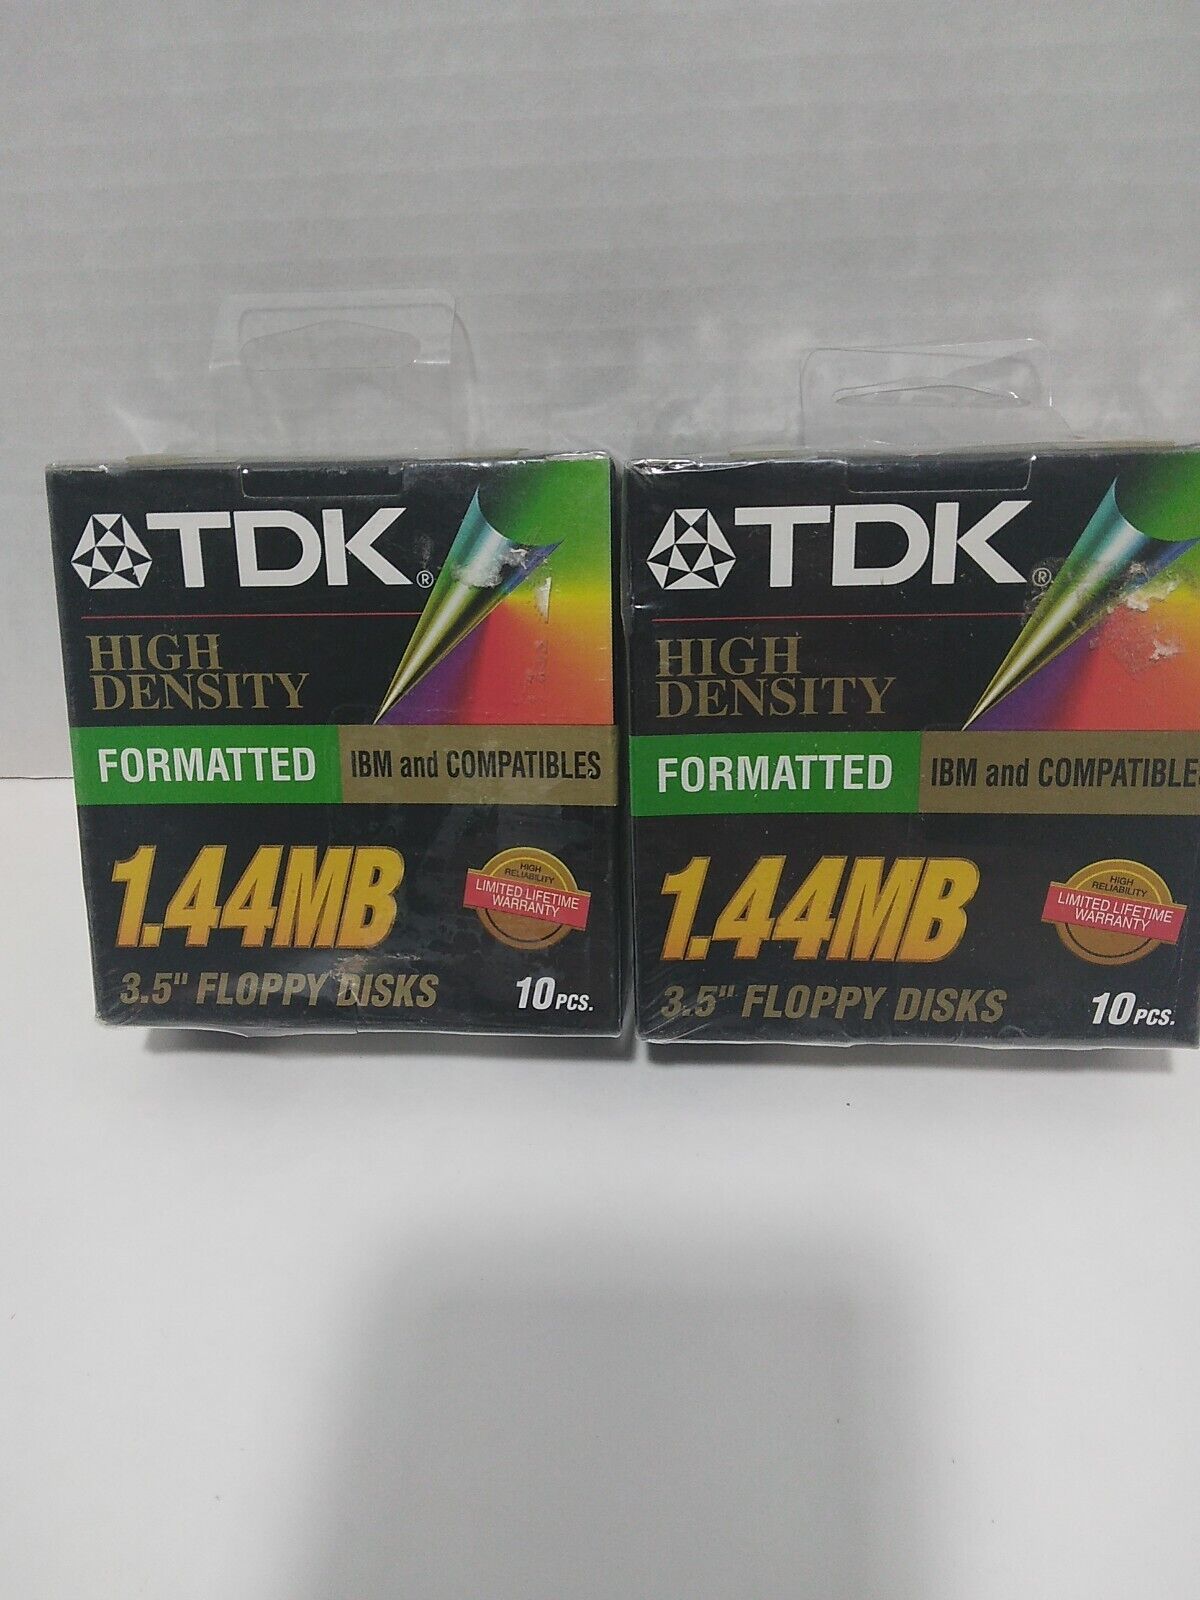 Tdk Formatted 3.5 Floppy Disks Two Packs Of 10 Each